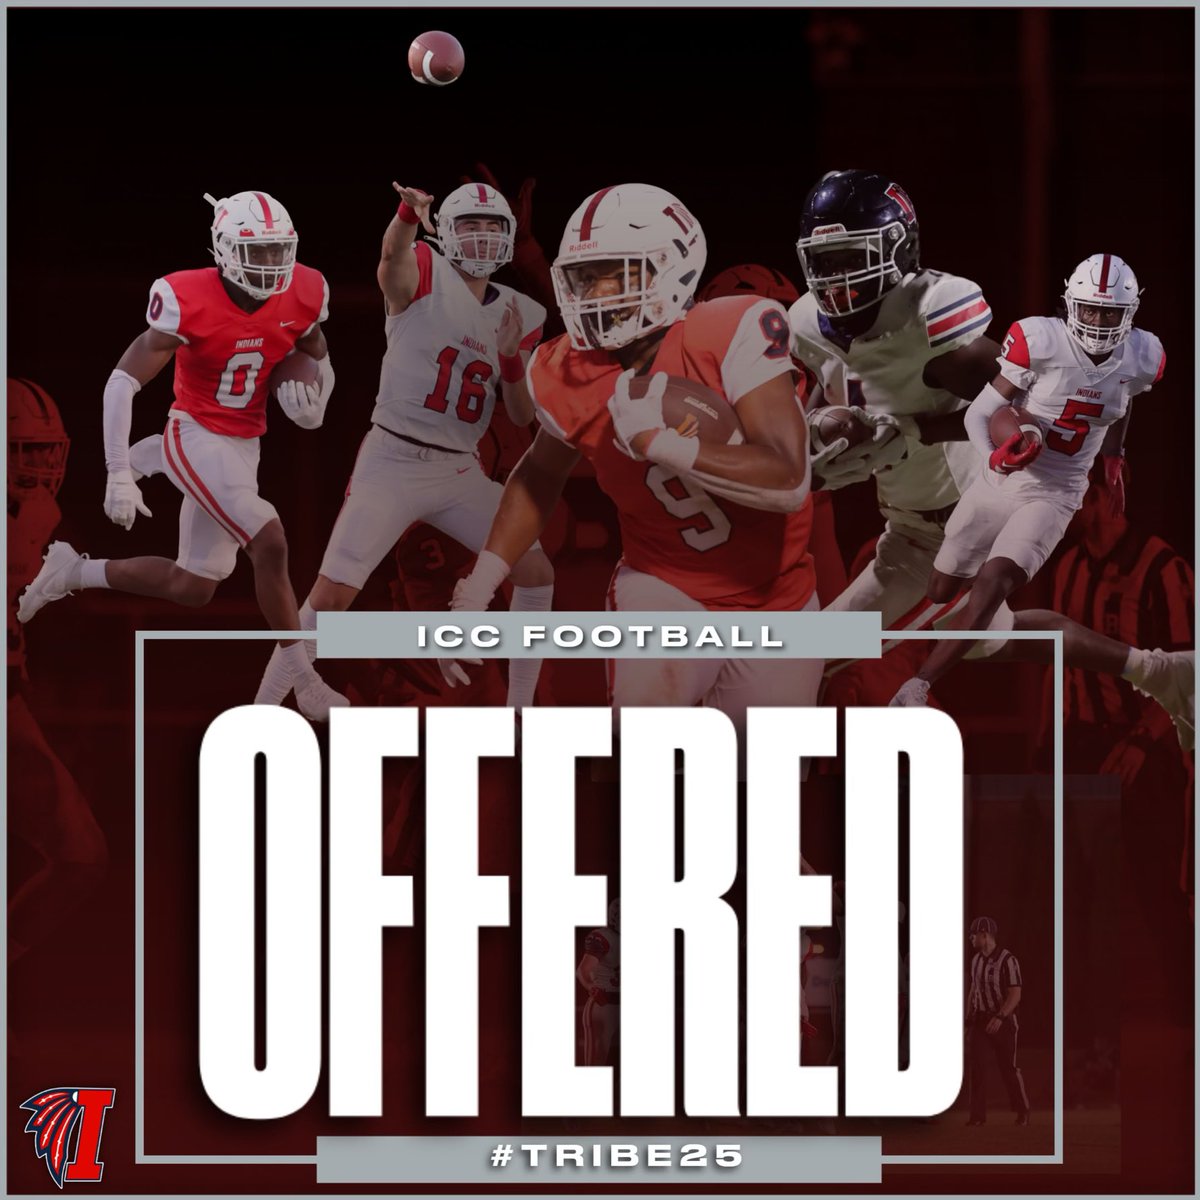 After a great conversation with ⁦@_CoachEllington⁩ i’m blessed to receive an offer from ⁦@LetsGoICC⁩ ⁦@wyattdalton4⁩ ⁦@matthew8freeman⁩ ⁦@shayhodge3⁩ ⁦@ESPN3ALLDAY⁩ ⁦@MacCorleone74⁩